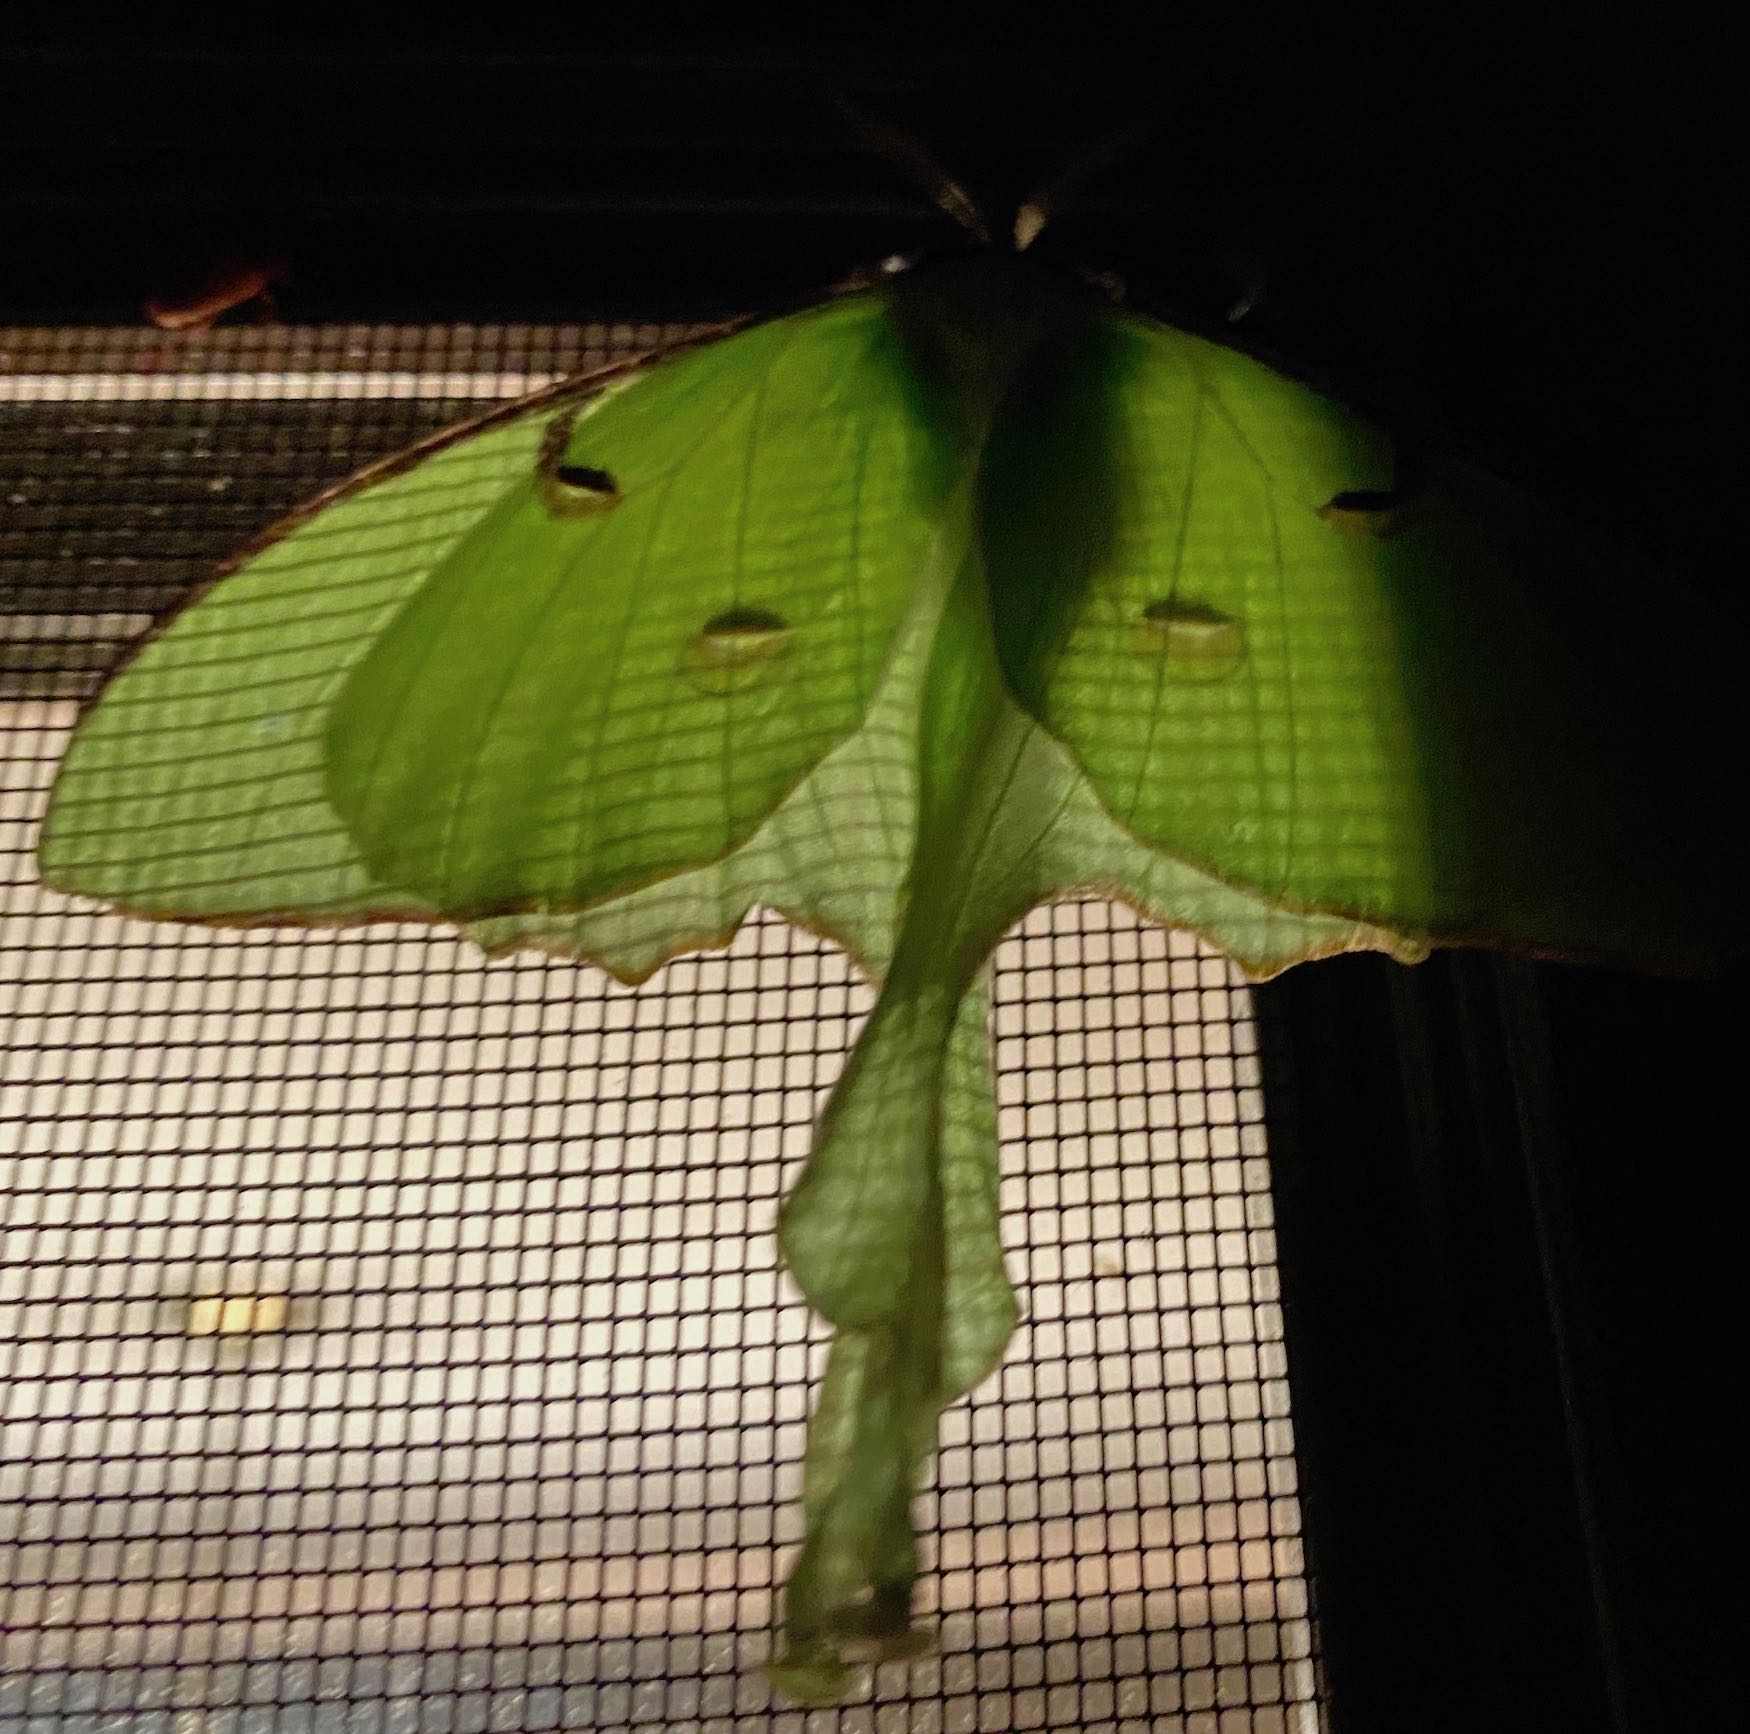 It's the weekend! Number 258, Luna Moth at Night